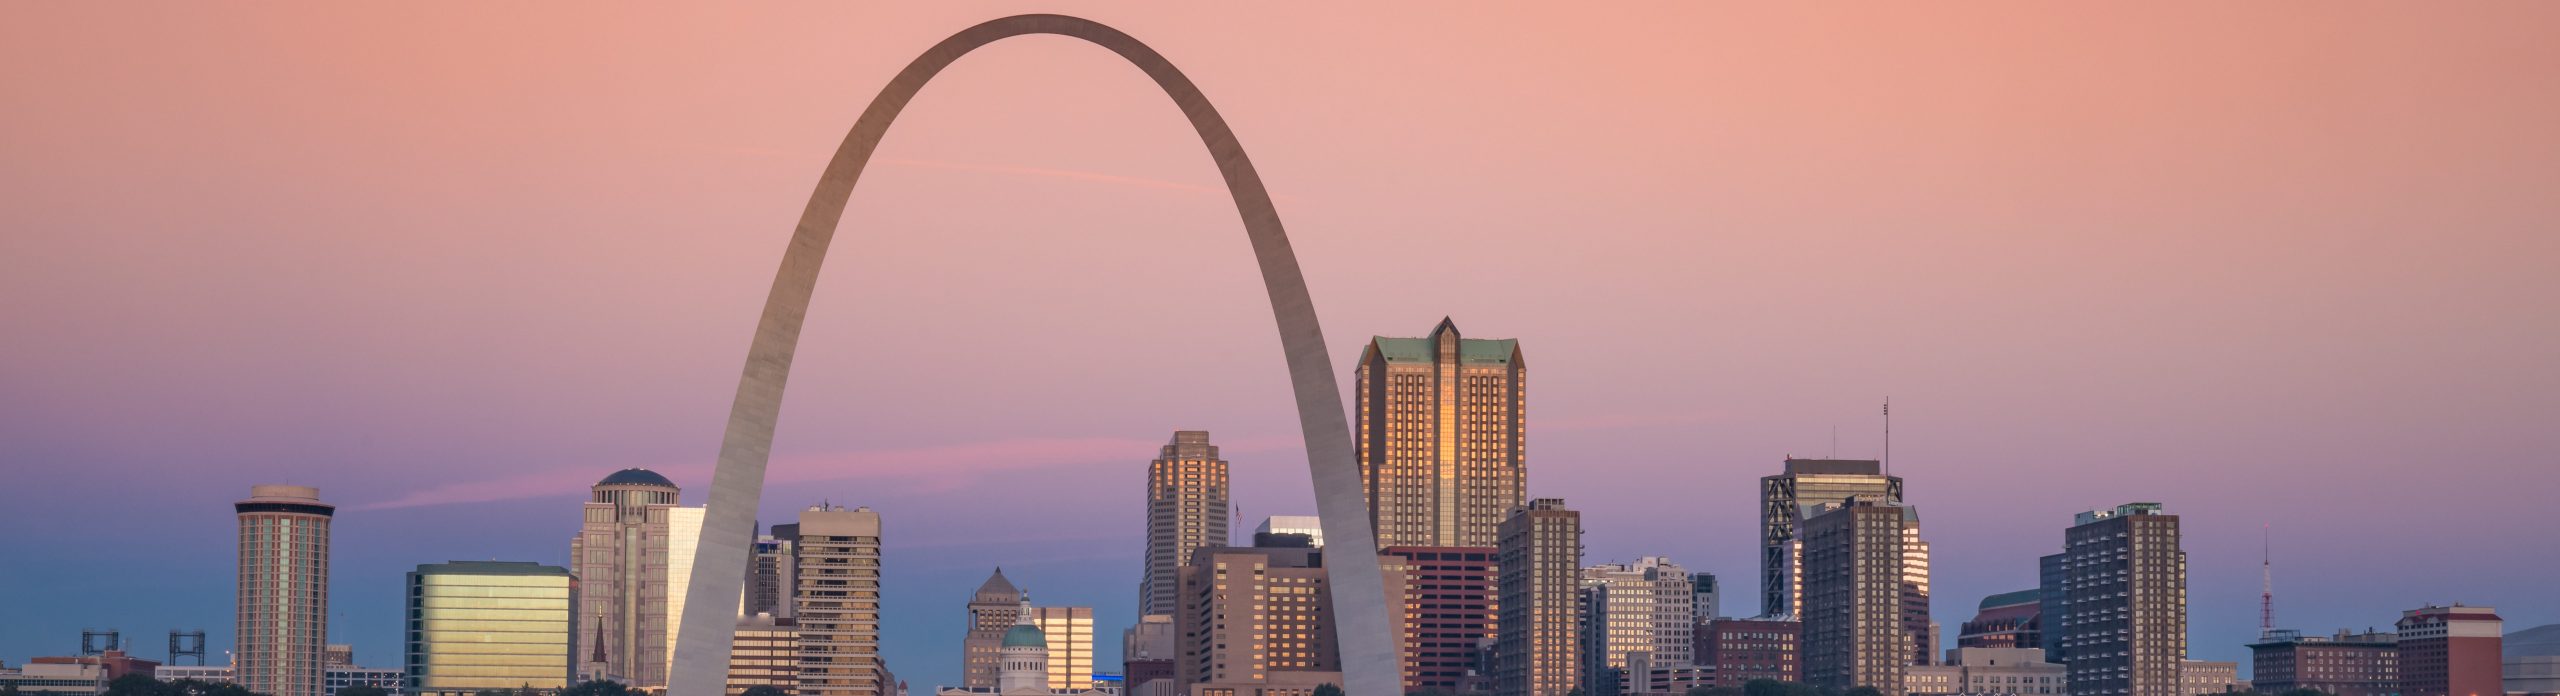 This is an image of The Gateway Arch in St. Louis where ASTA-USA offers professional translation services.